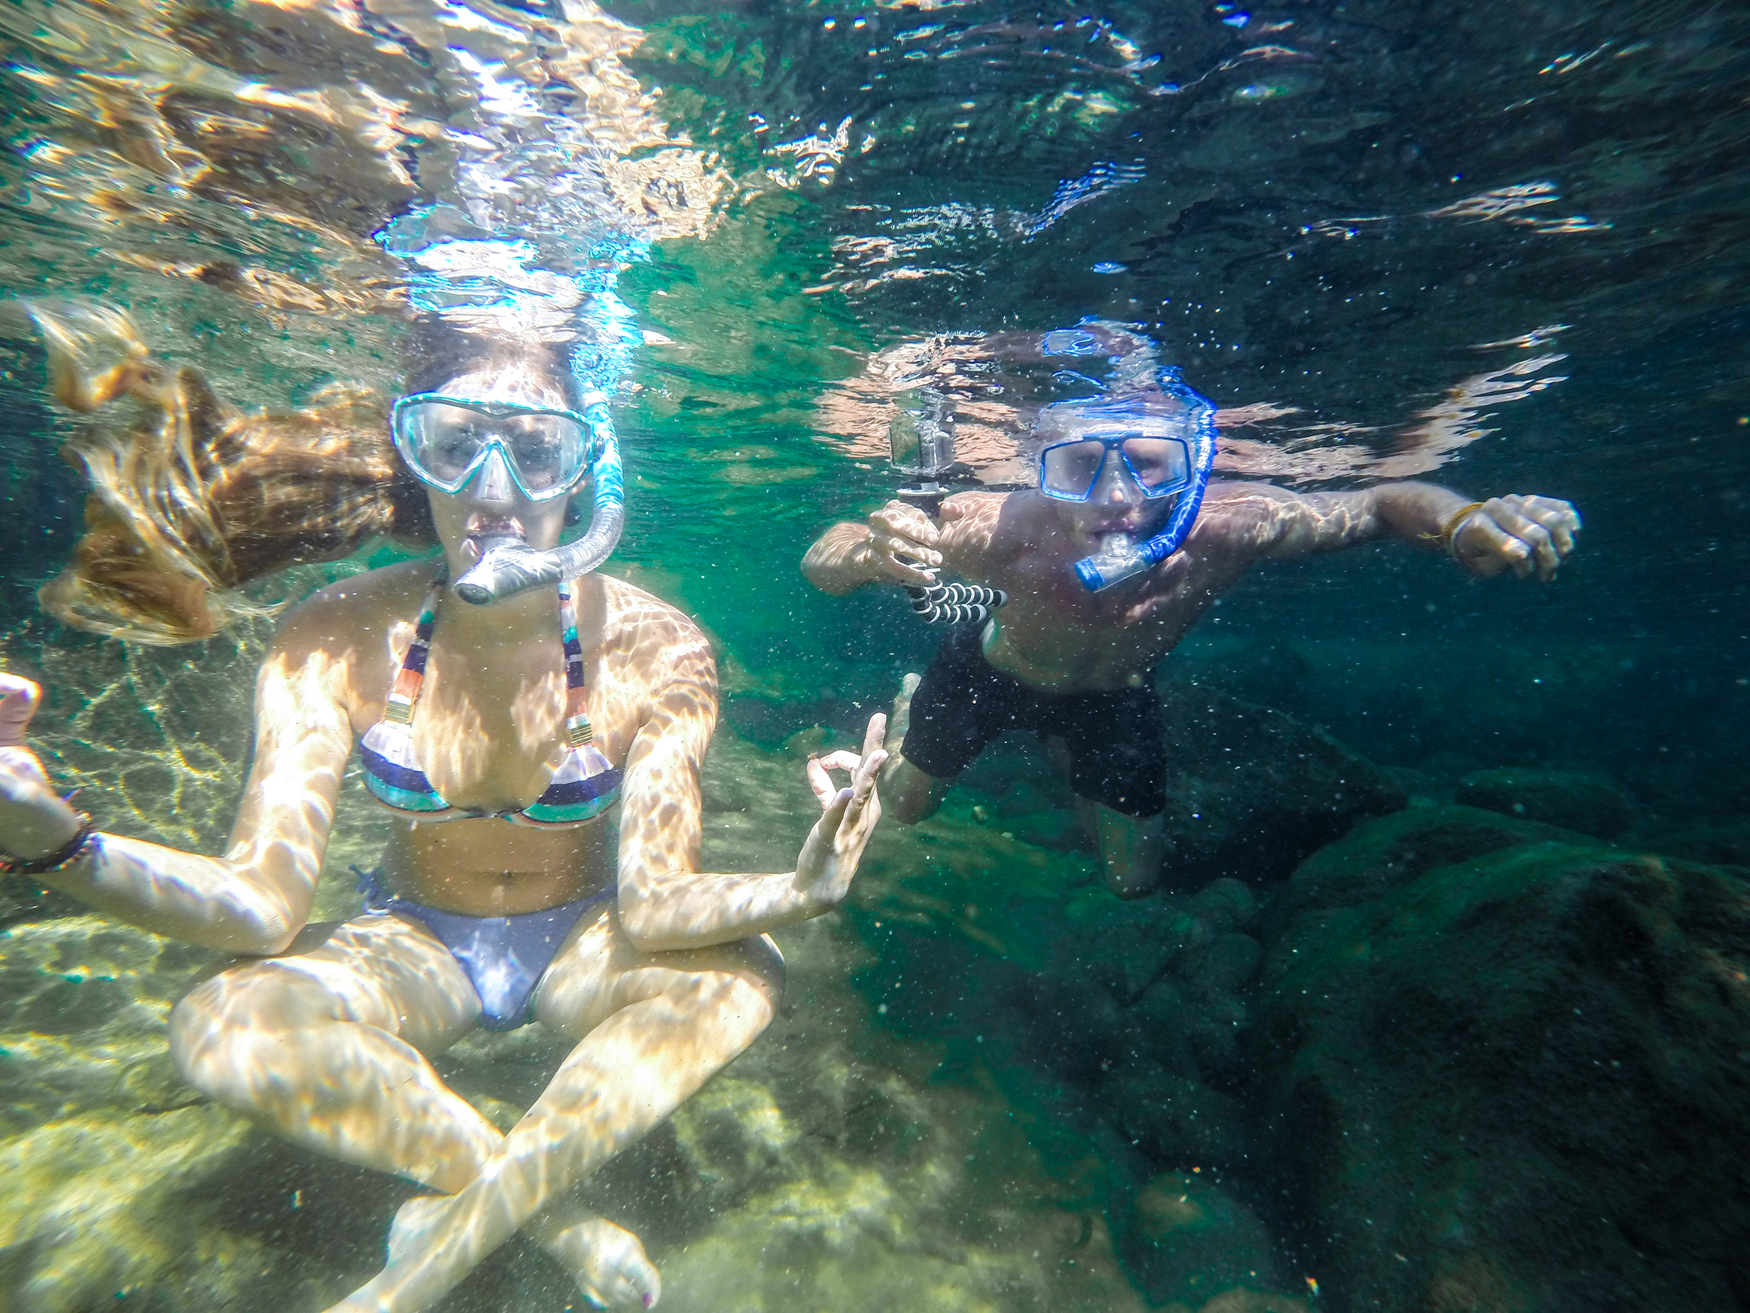 Outside the 9-to-5: Snorkeling the Yuba River | Submerge Magazine